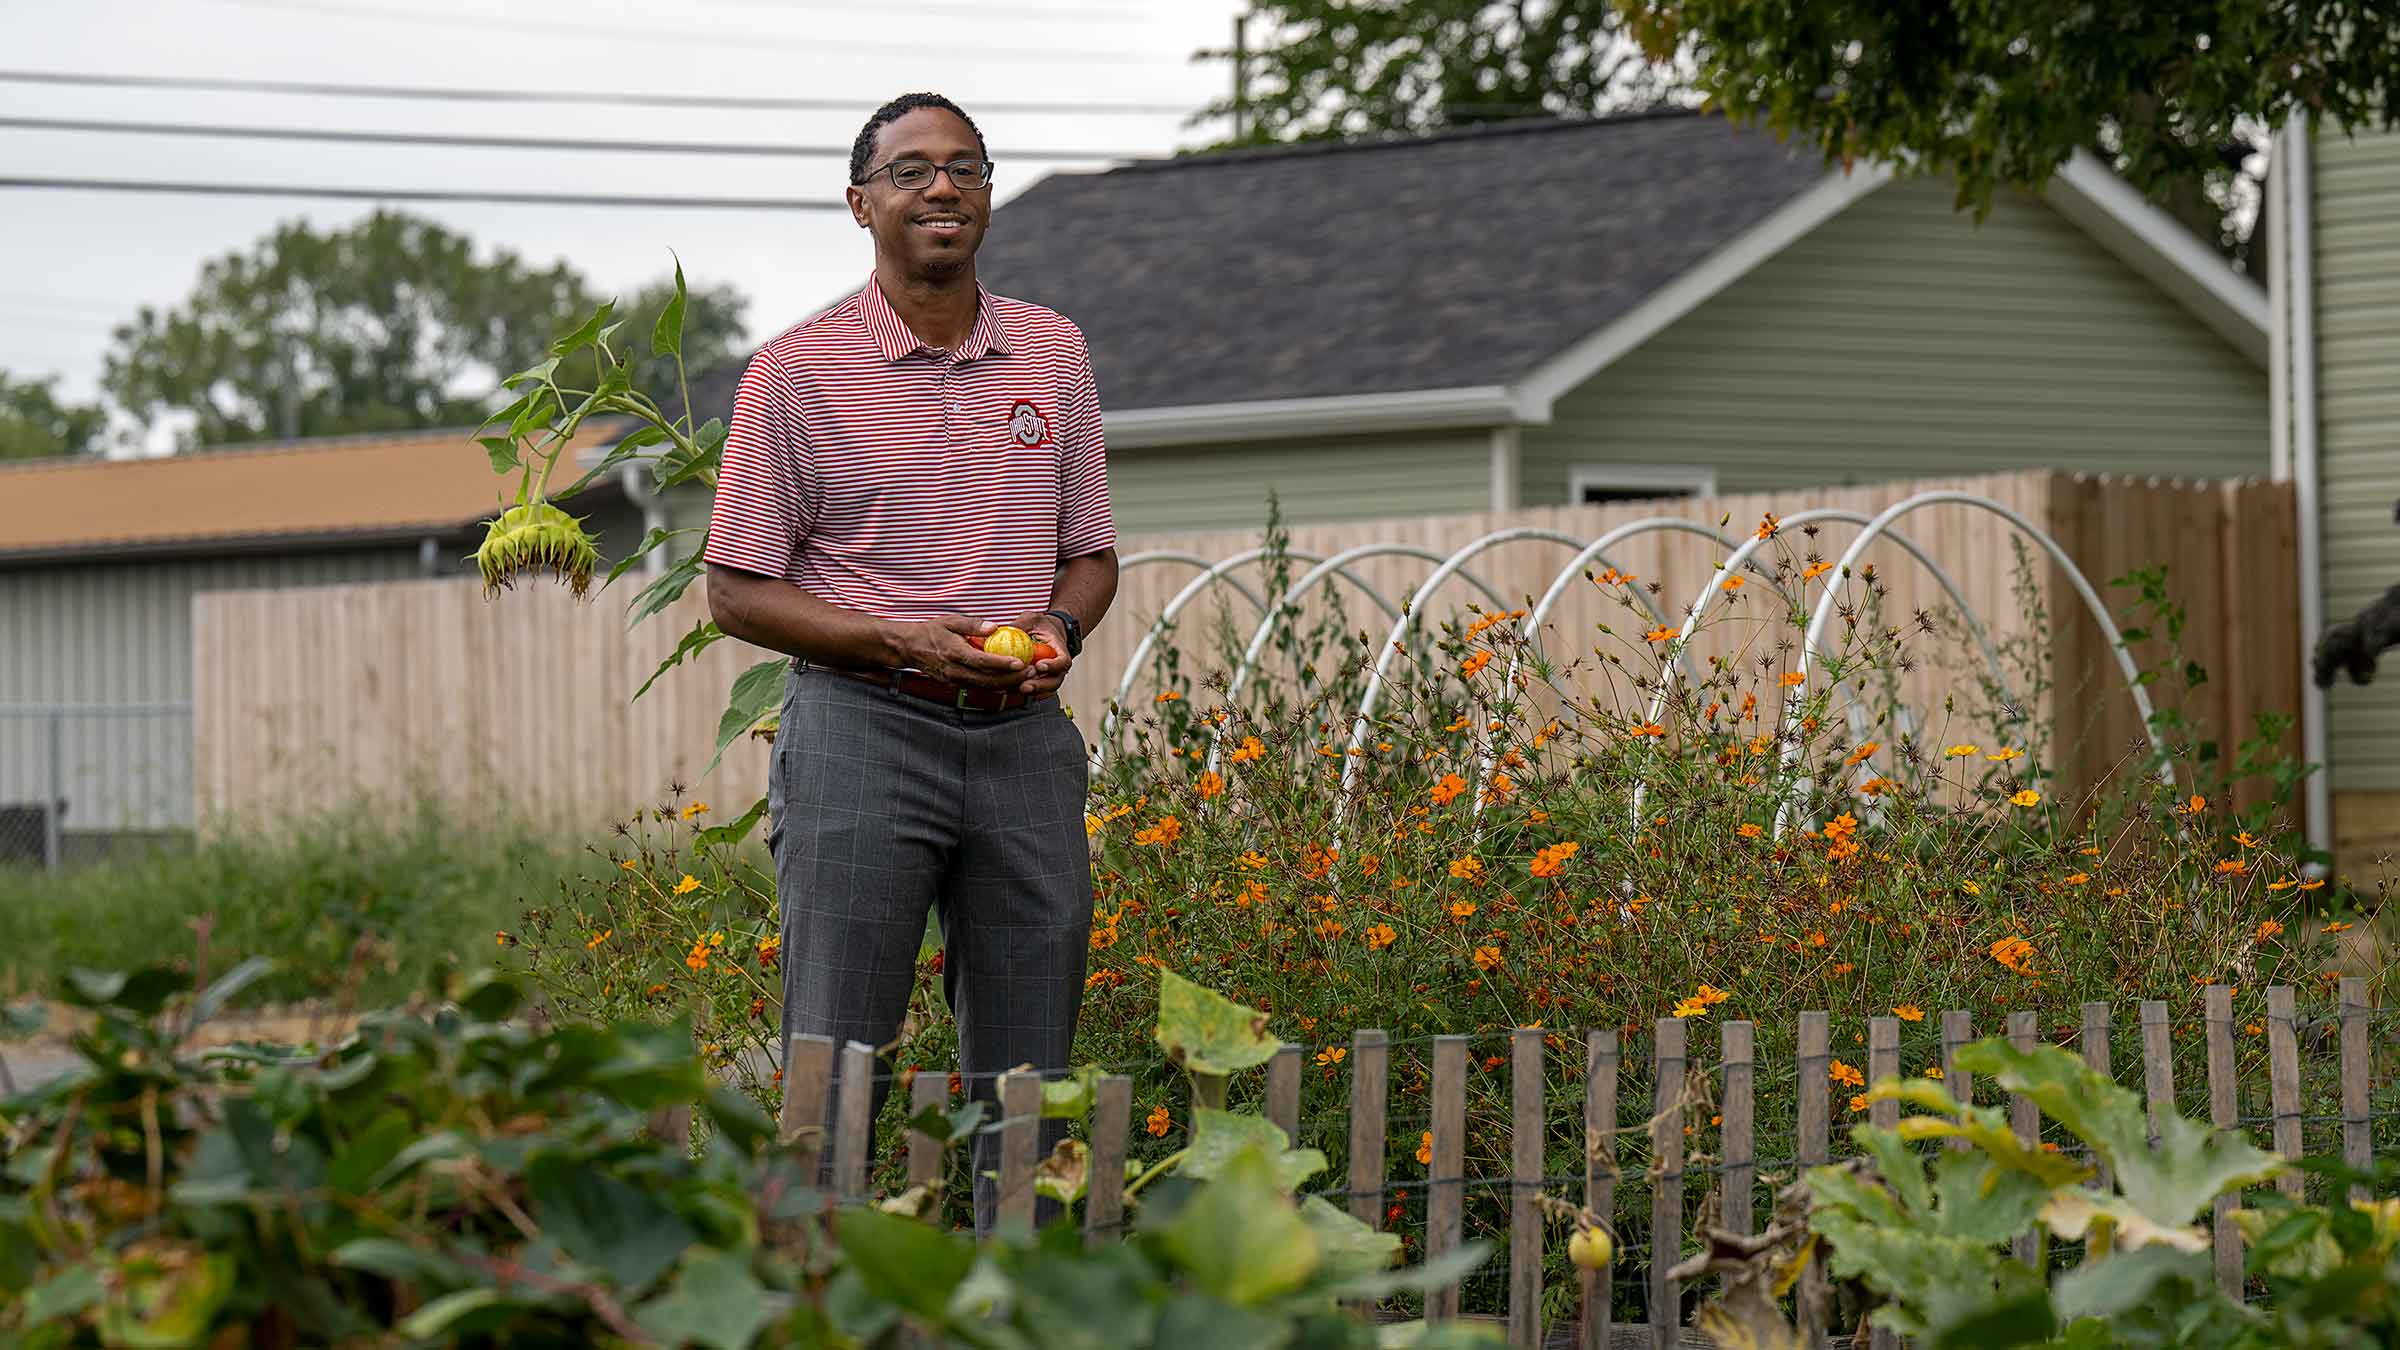 Dr. Joseph standing in a garden holding tomatoes